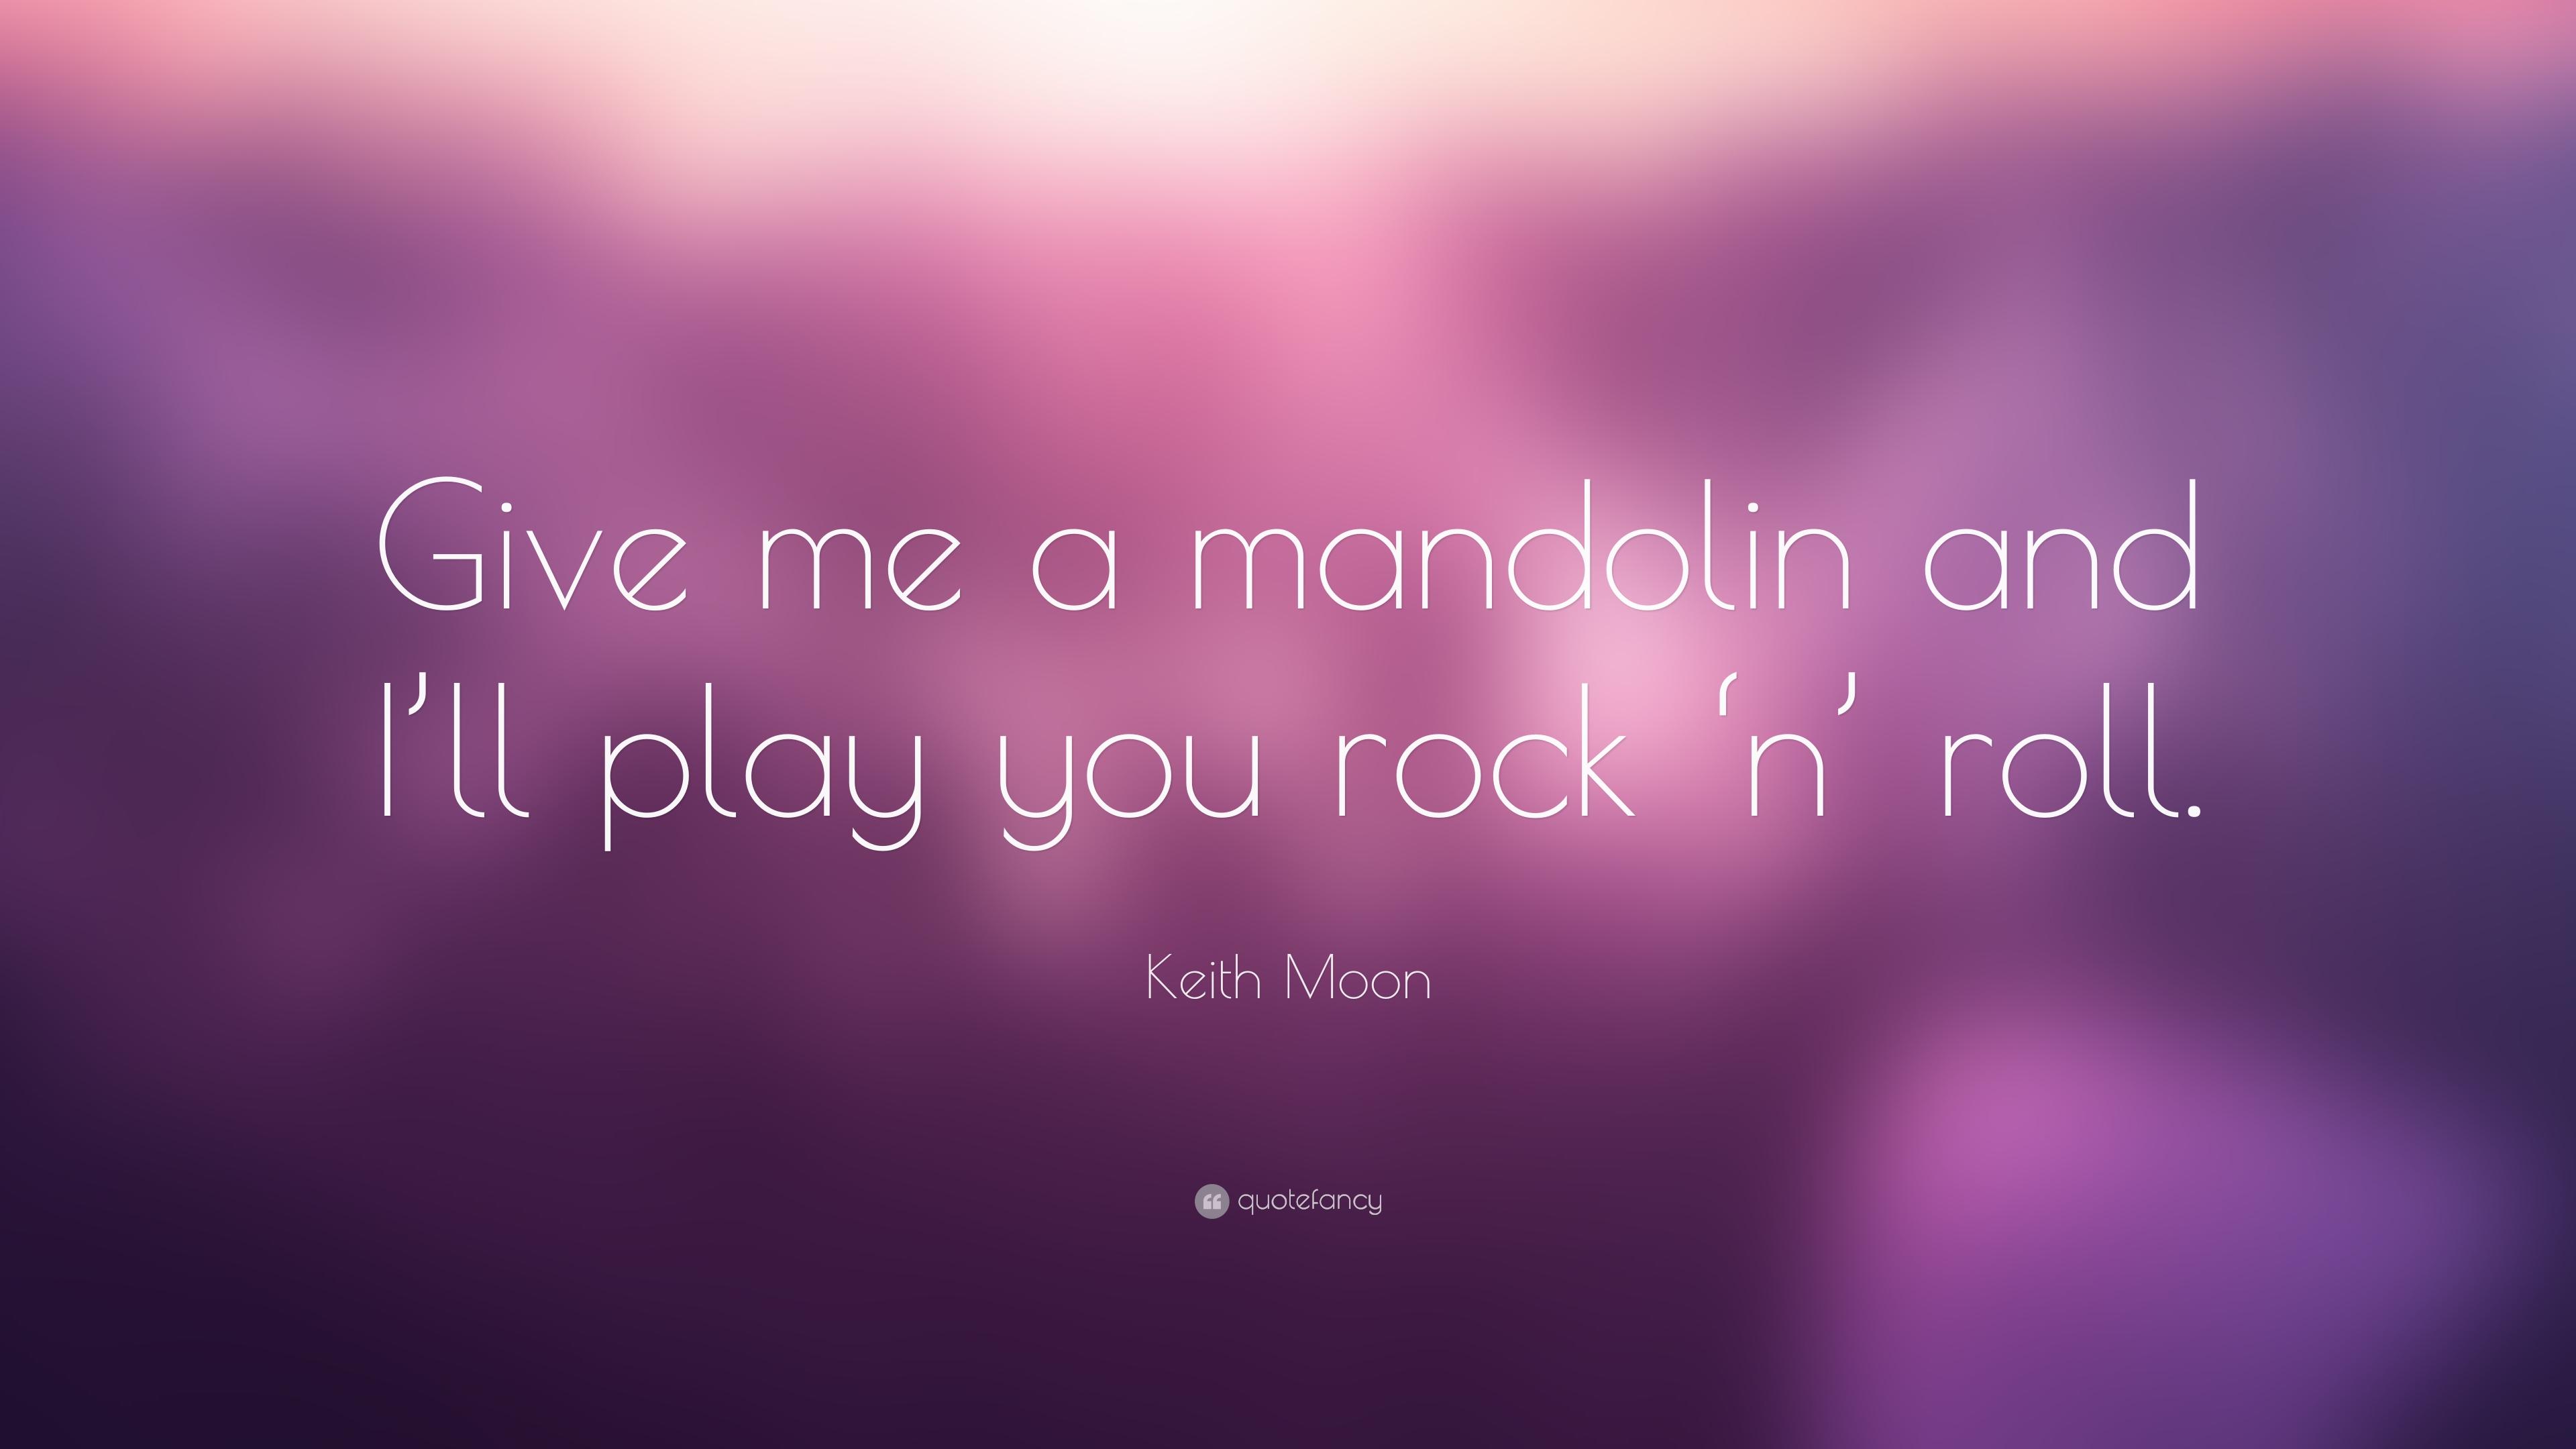 Keith Moon Quote: “Give me a mandolin and I'll play you rock 'n